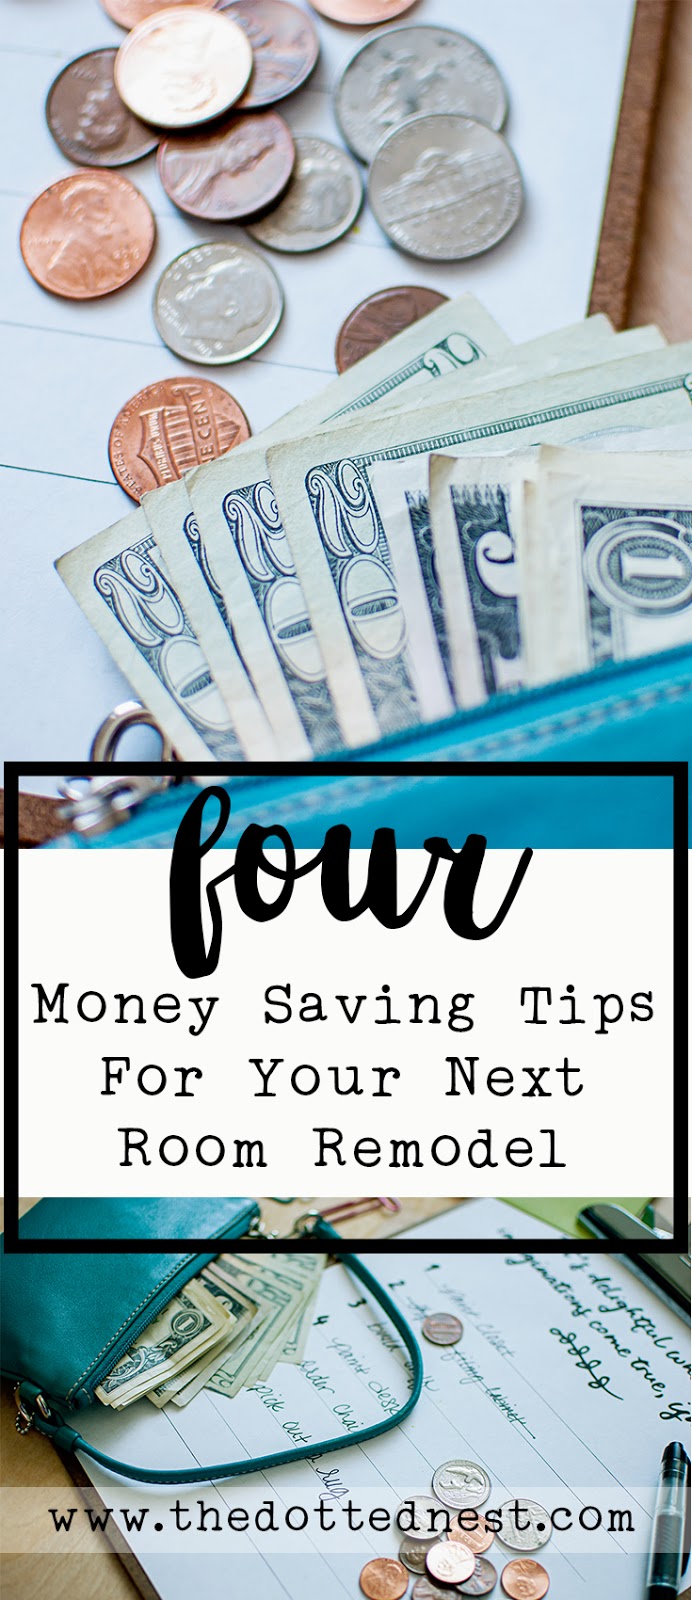 Four Money Saving Tips For Your Next Room Remodel